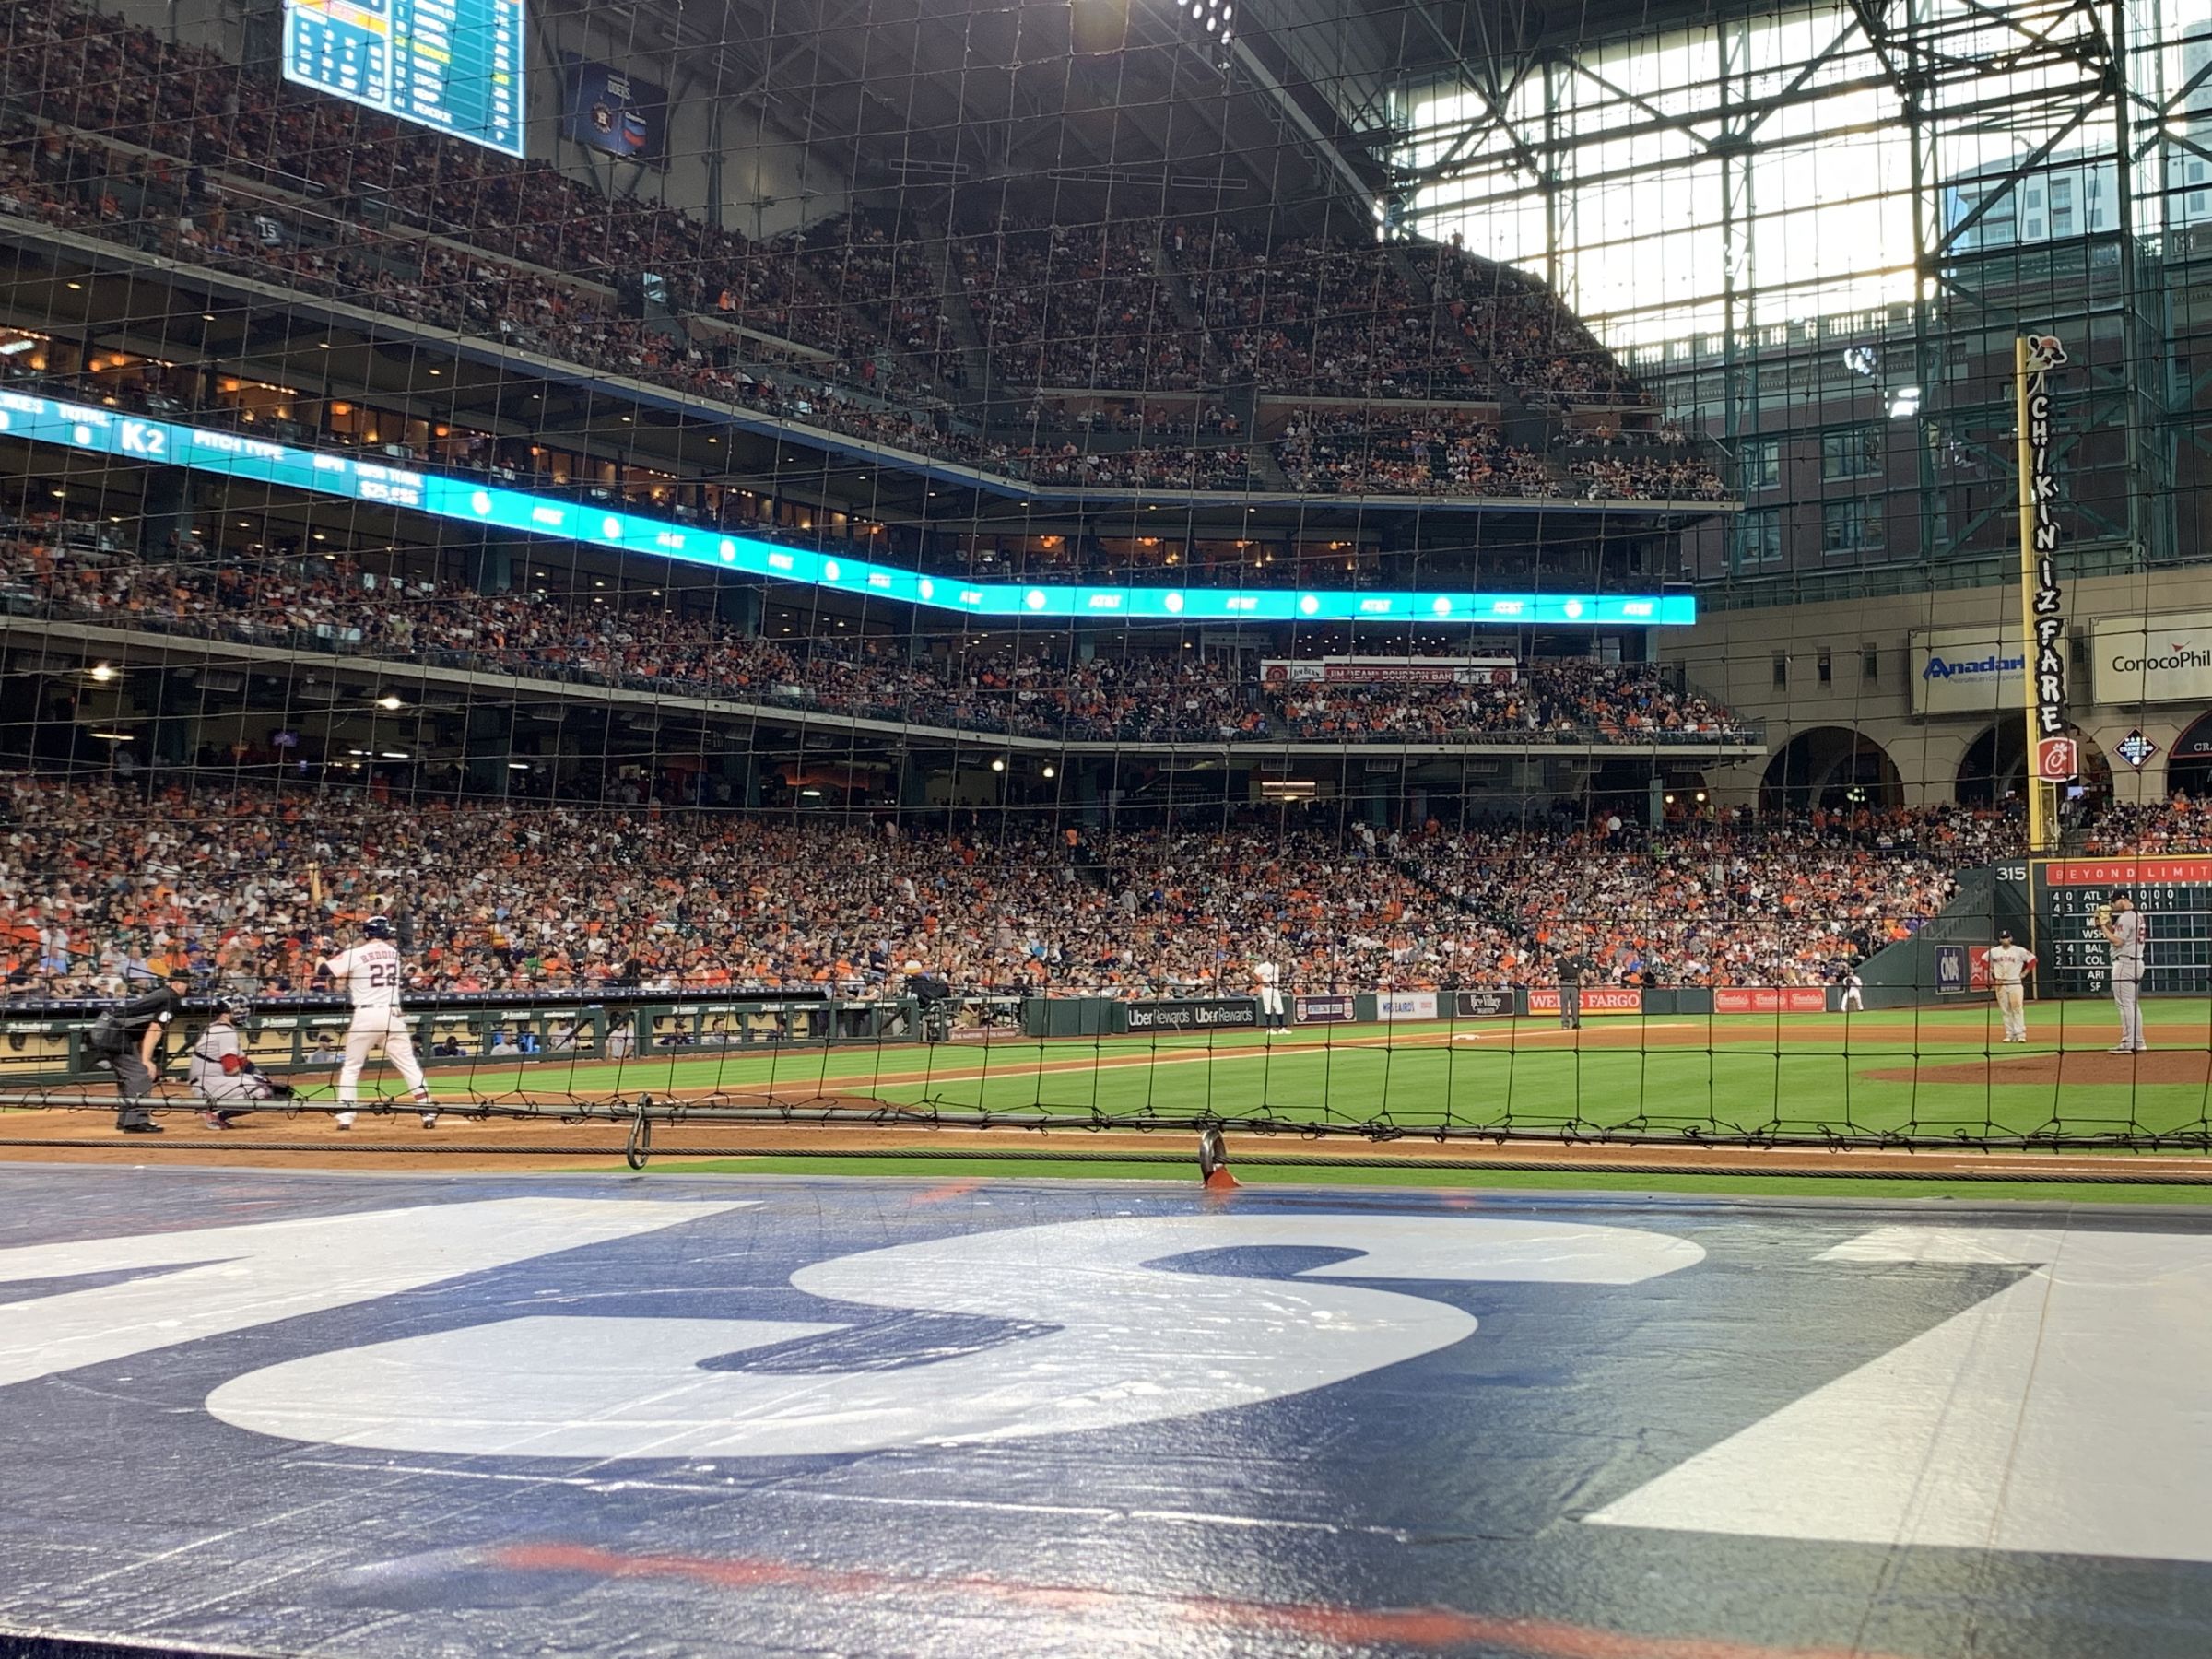 Why can't the Astros win at home? Minute Maid Park's batter's eye